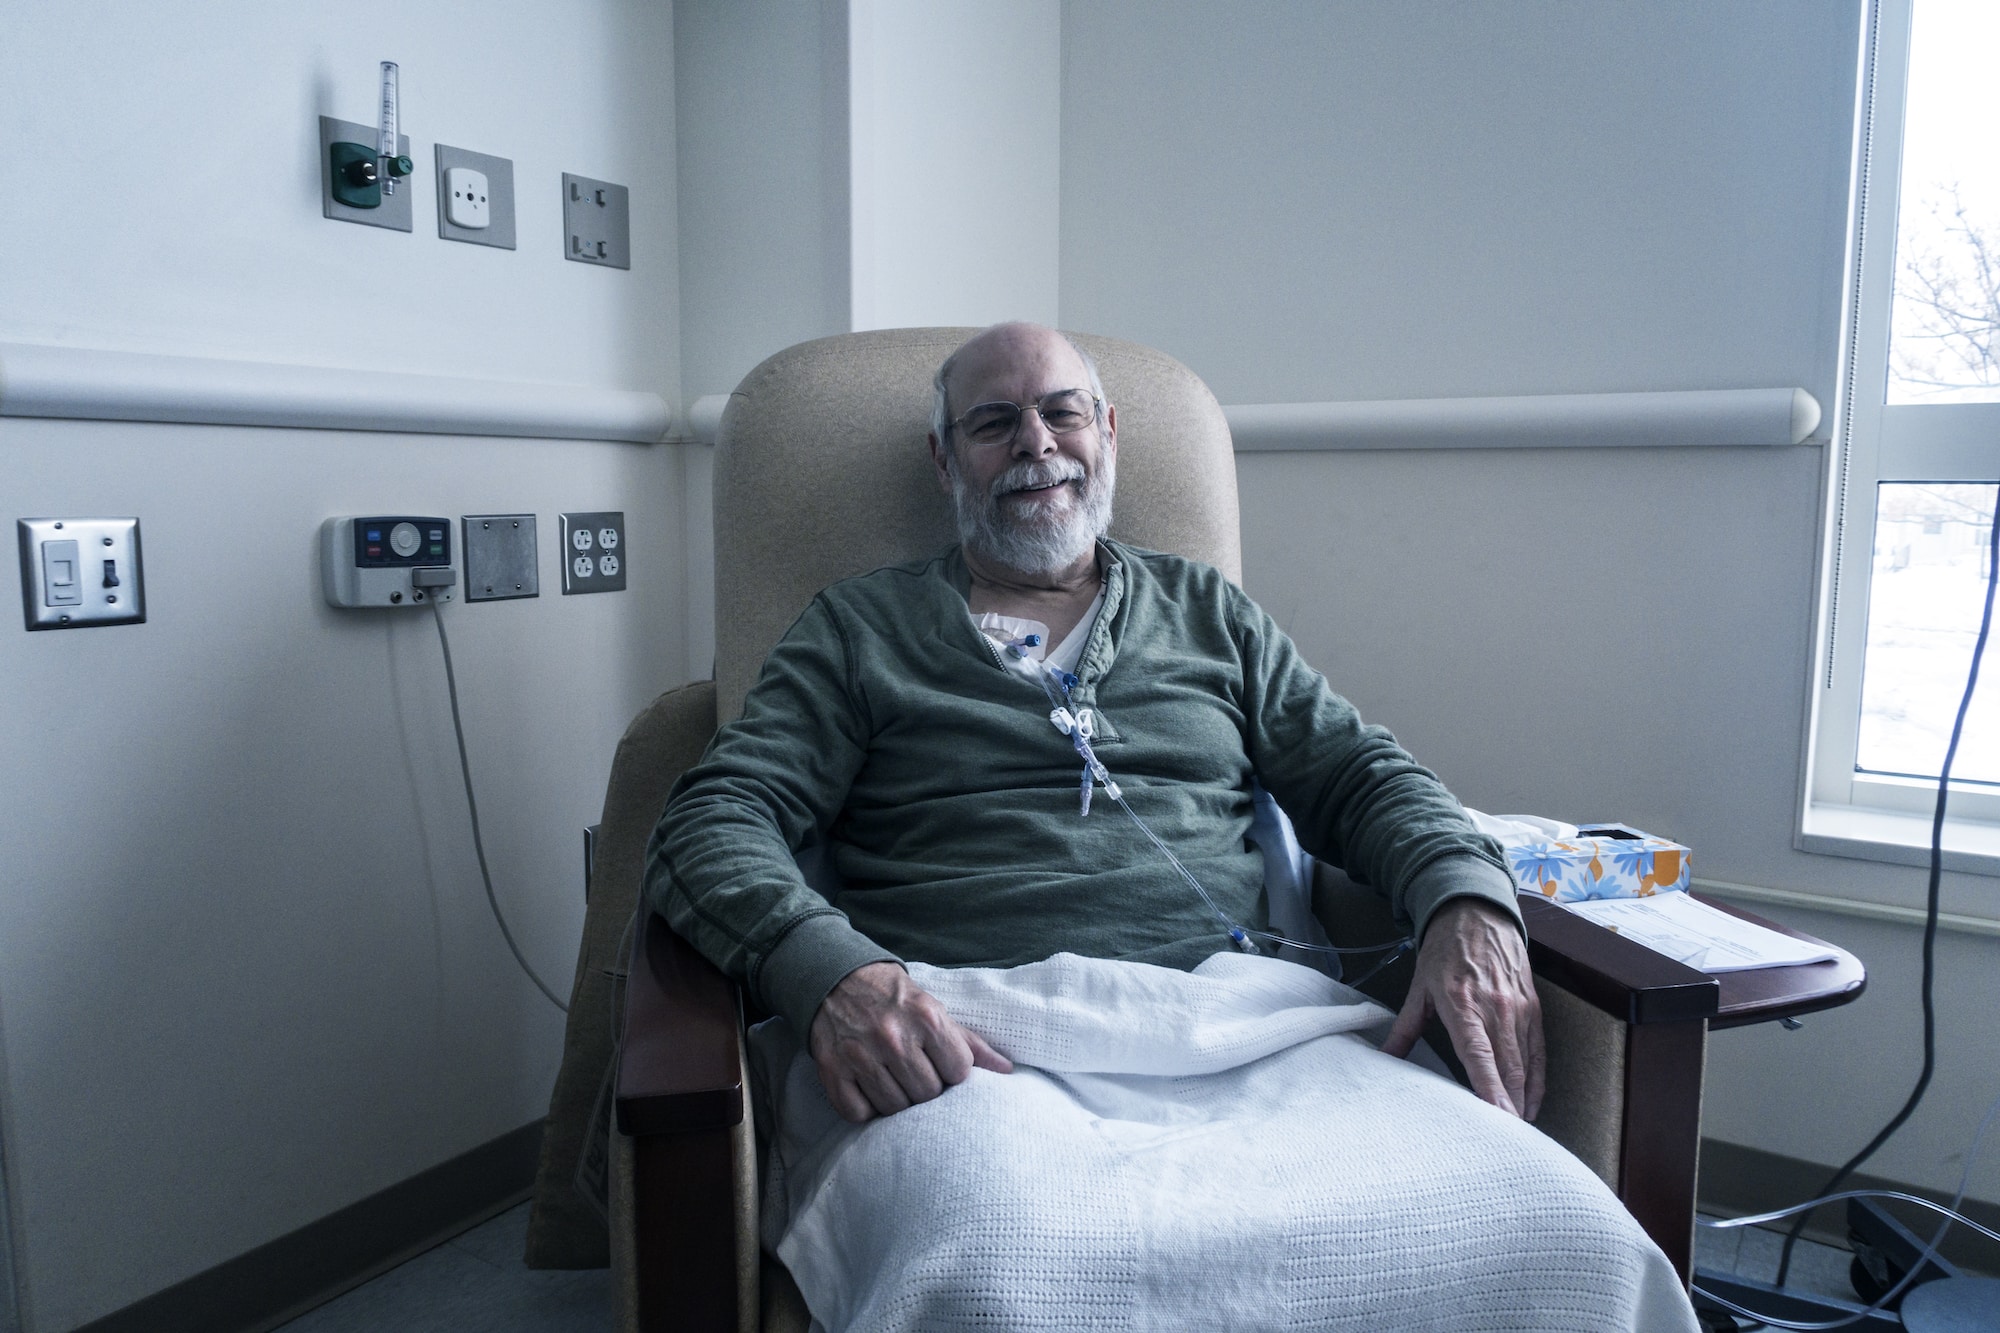 A senior adult man outpatient cancer patient - alert, but tired and bored - is sitting resting comfortably while chemotherapy IV drip medicine is administered by a tangled array of medical equipment through an intravenous chemo access port temporarily embedded into his upper chest. The plastic tubes, clamps, connectors, caps and off-camera drip bags are attached only during each two to three hour on-site session at this medical hospital clinic. The embedded access port stays in place throughout his three month bi-weekly chemotherapy regimen.